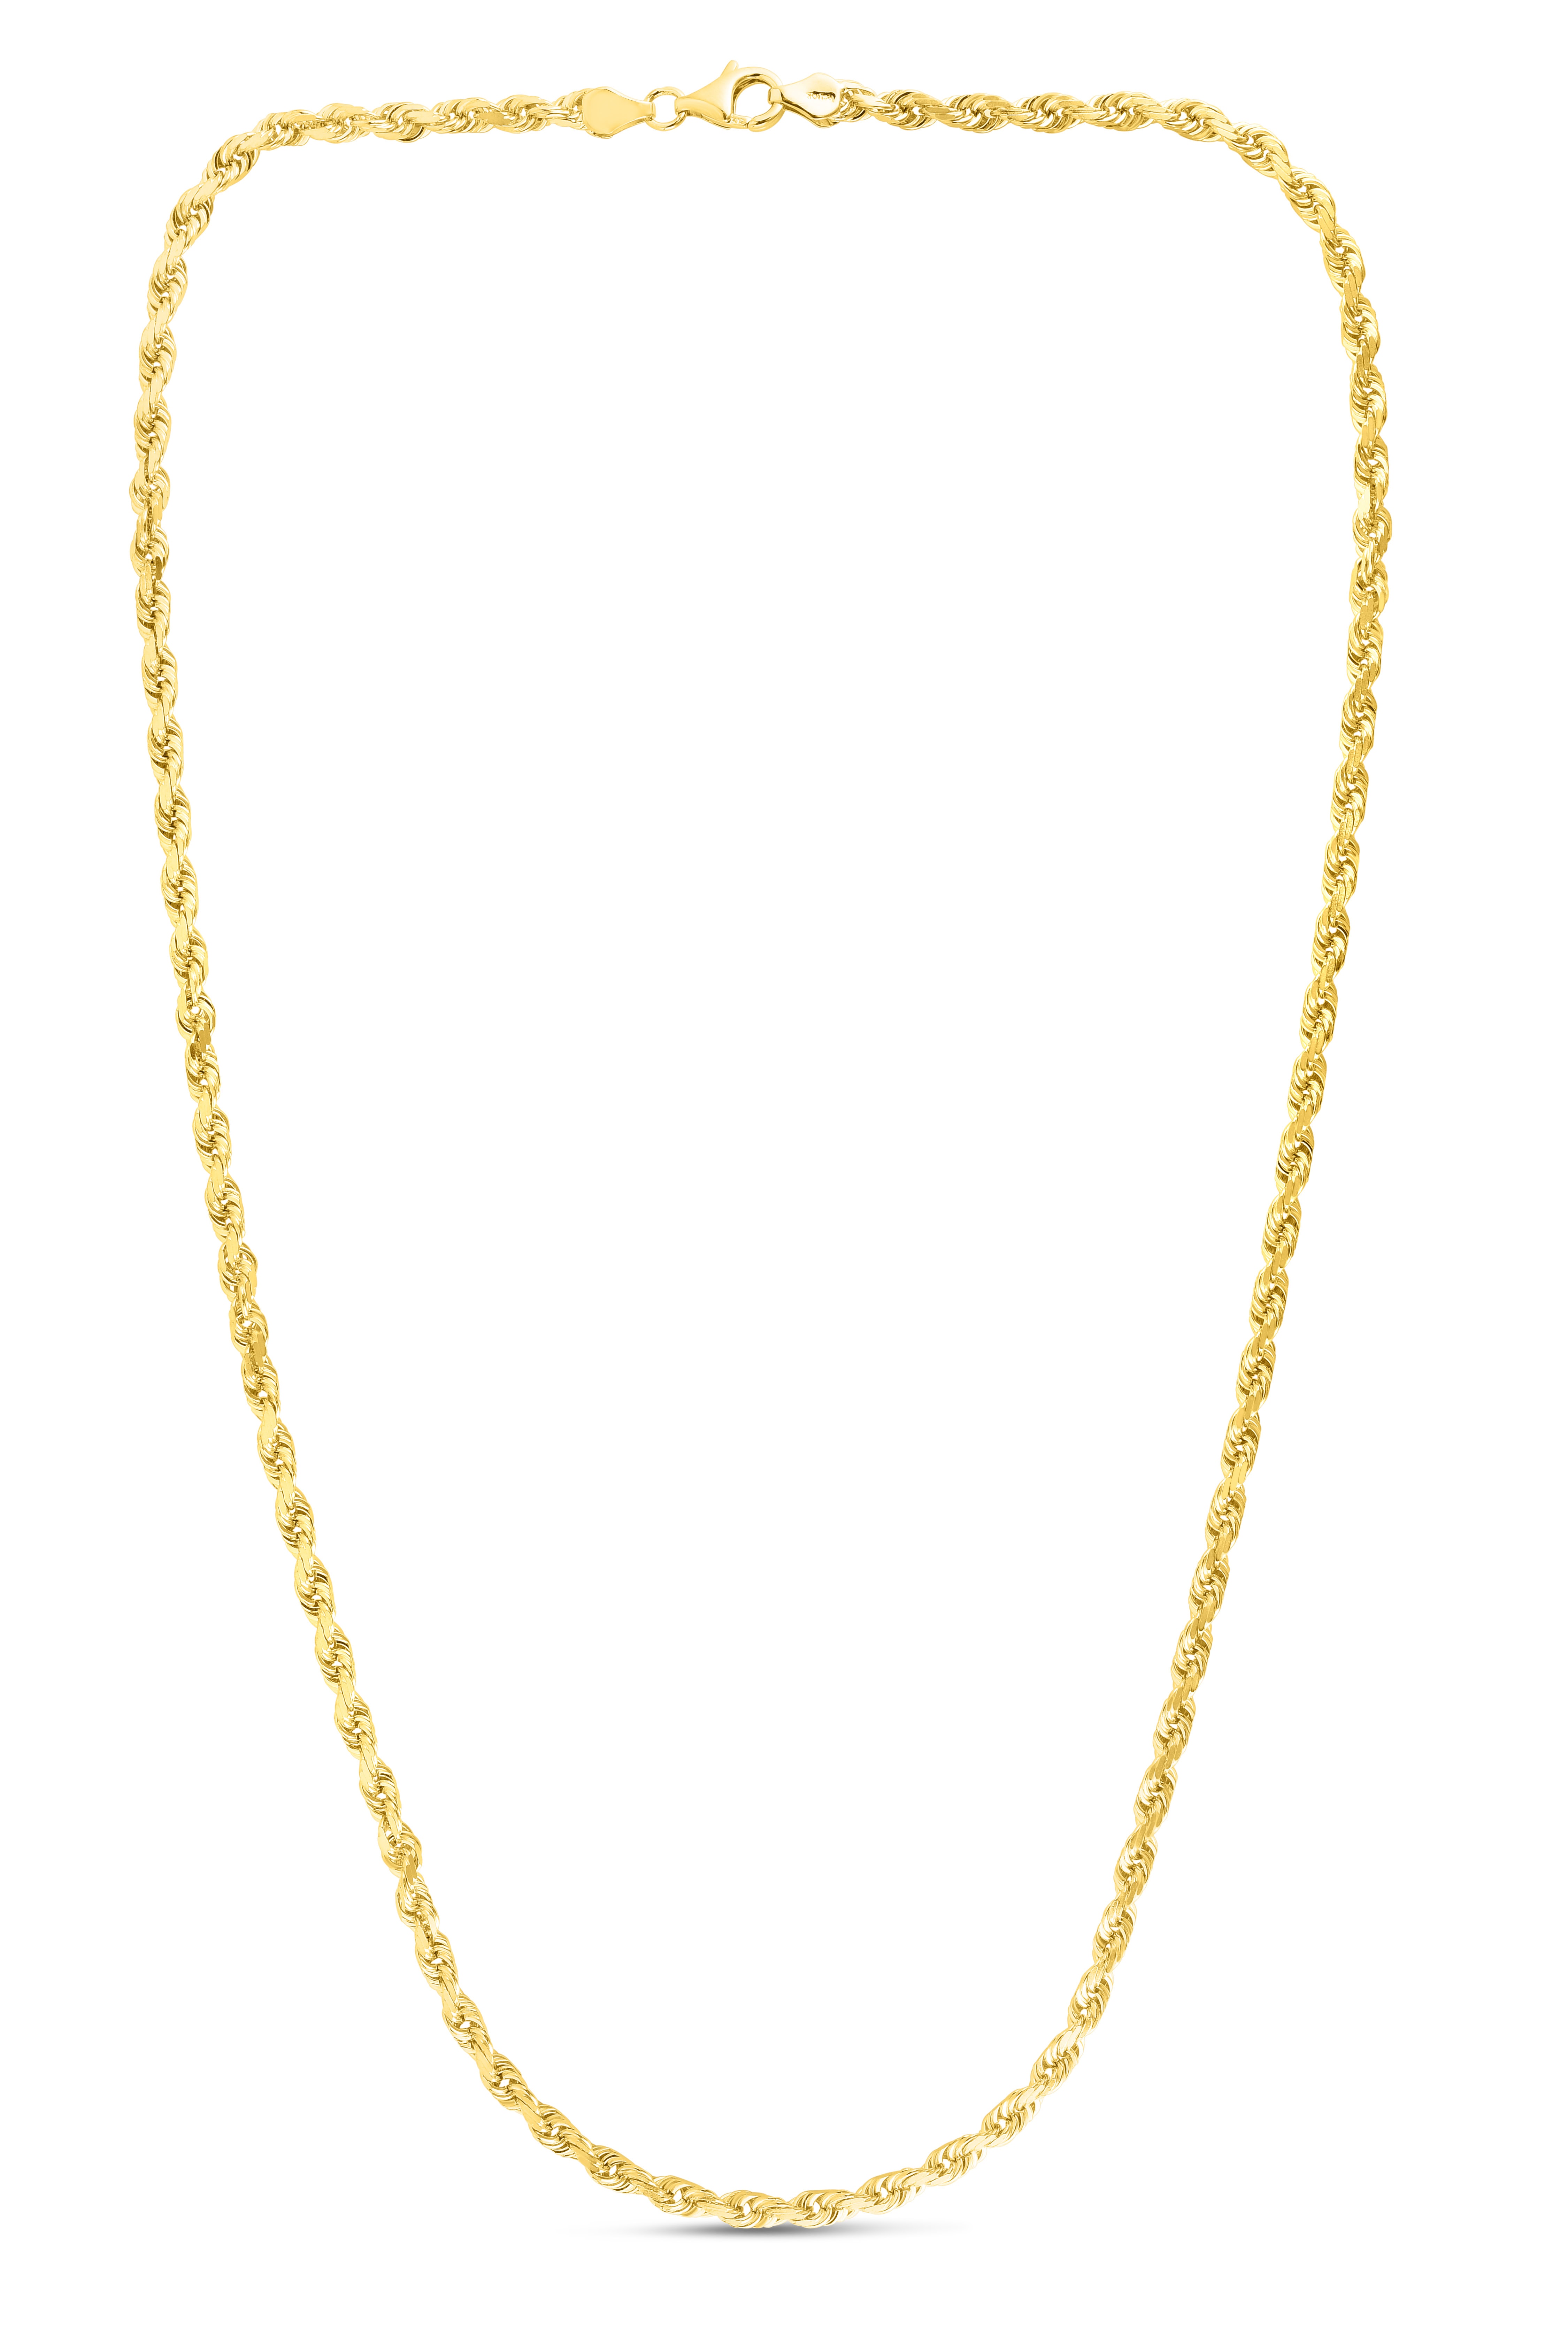 10K Gold 5.0mm Solid Diamond Cut Royal Rope Chain